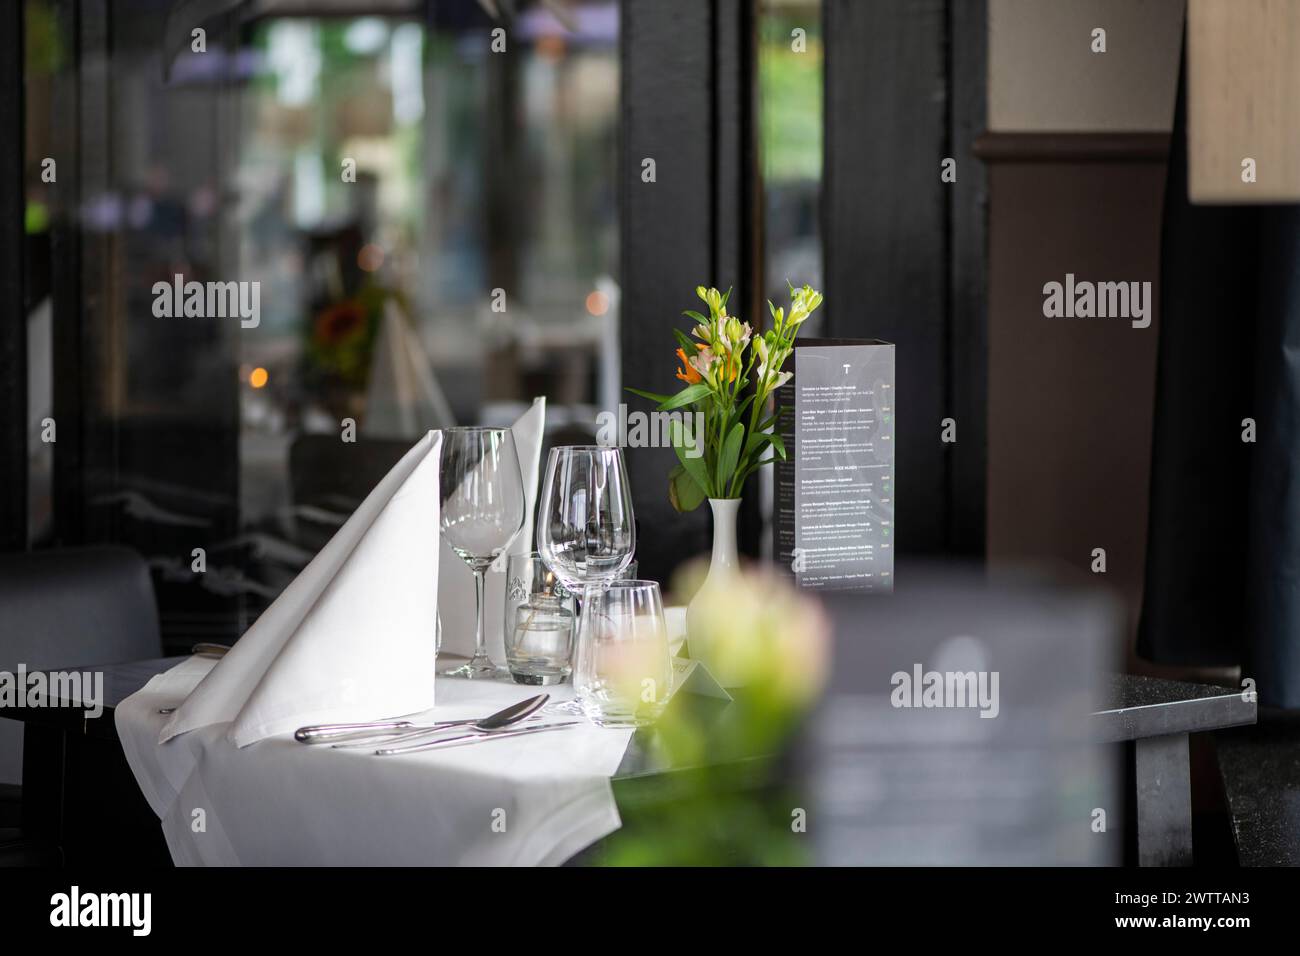 Elegant table setting at a sidewalk cafe, awaiting guests. Stock Photo